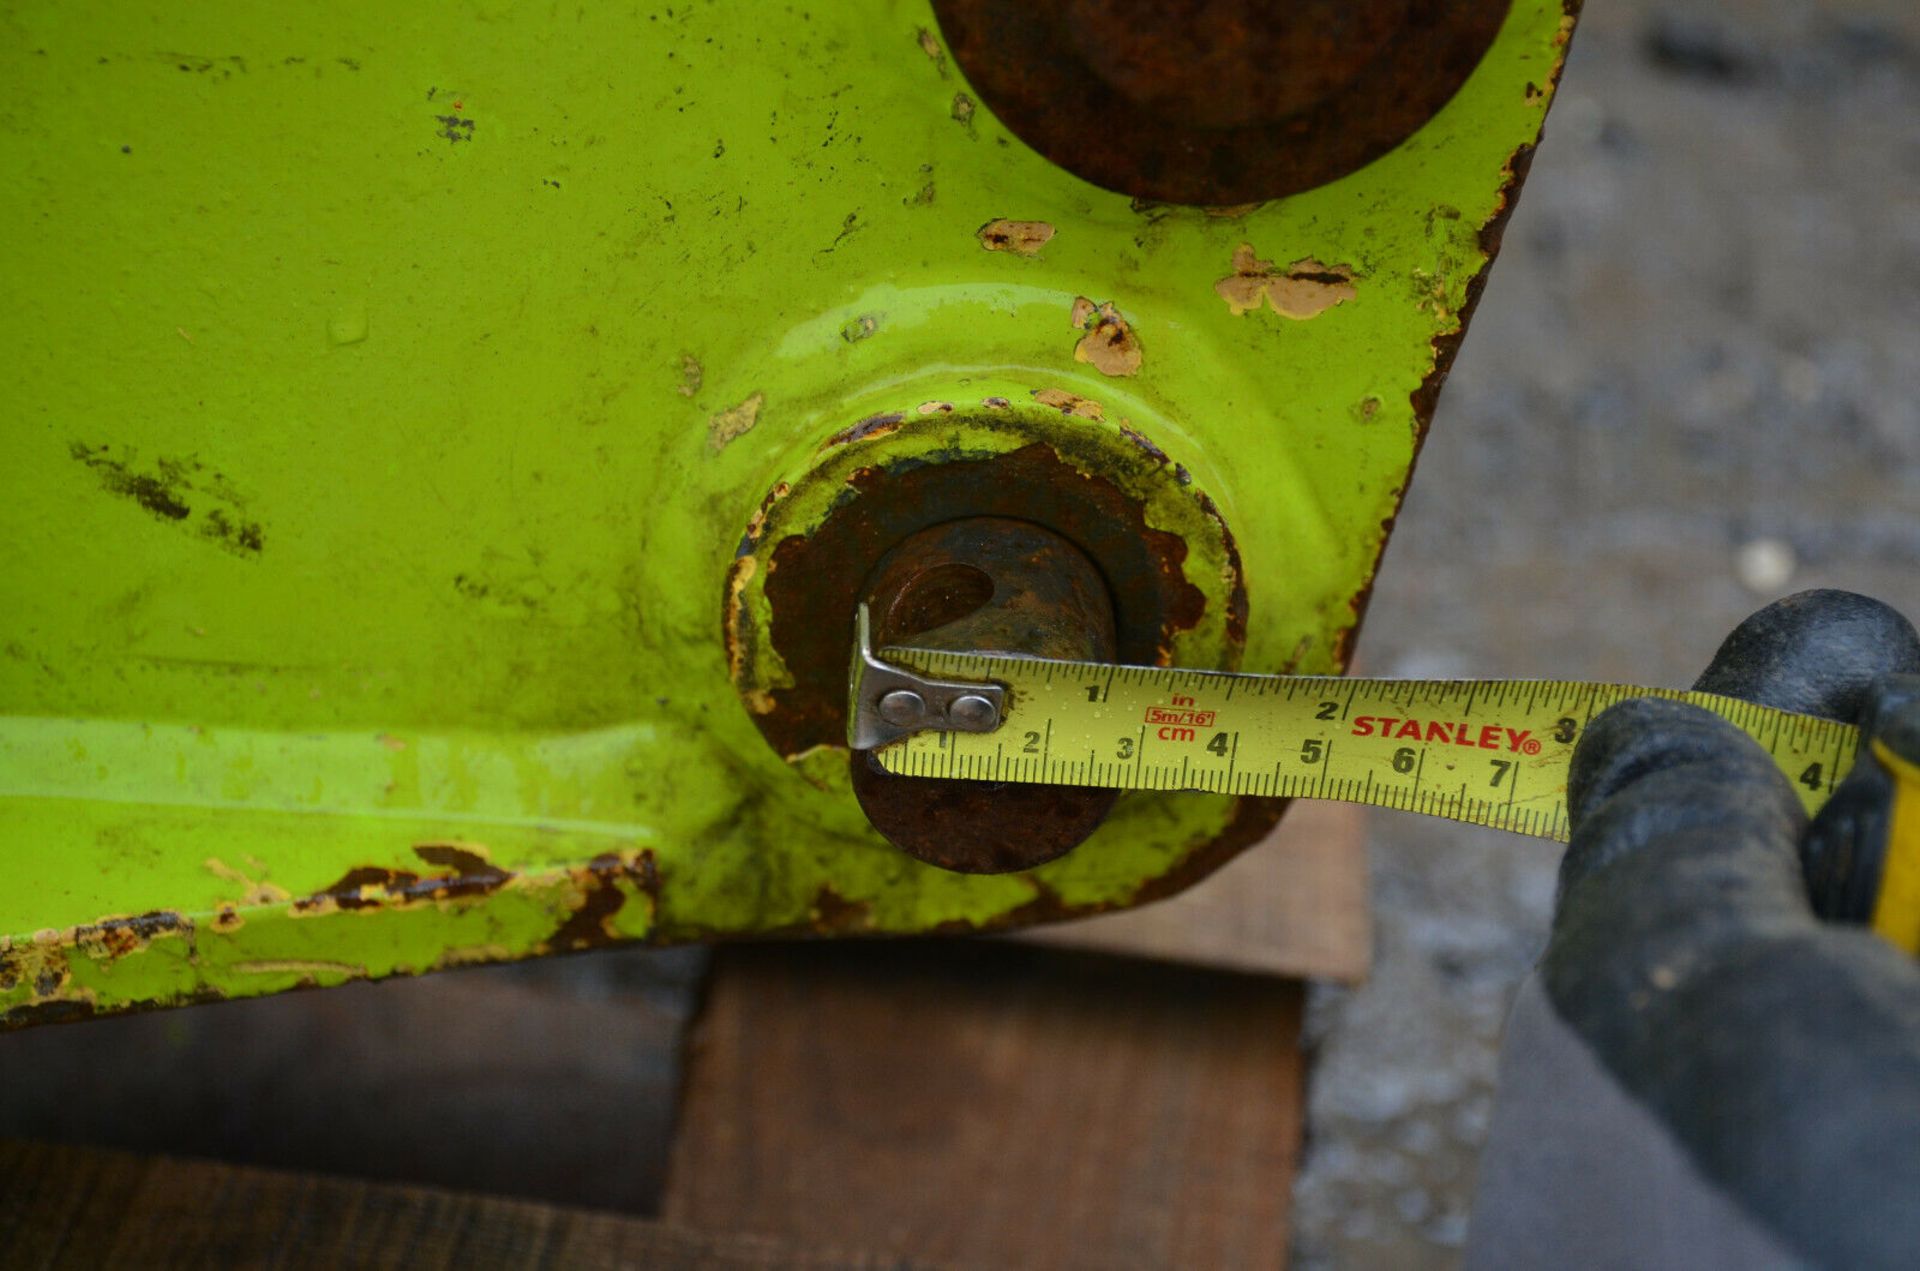 Hydraulic hammer/breaker for excavator digger 3495 - Image 6 of 7